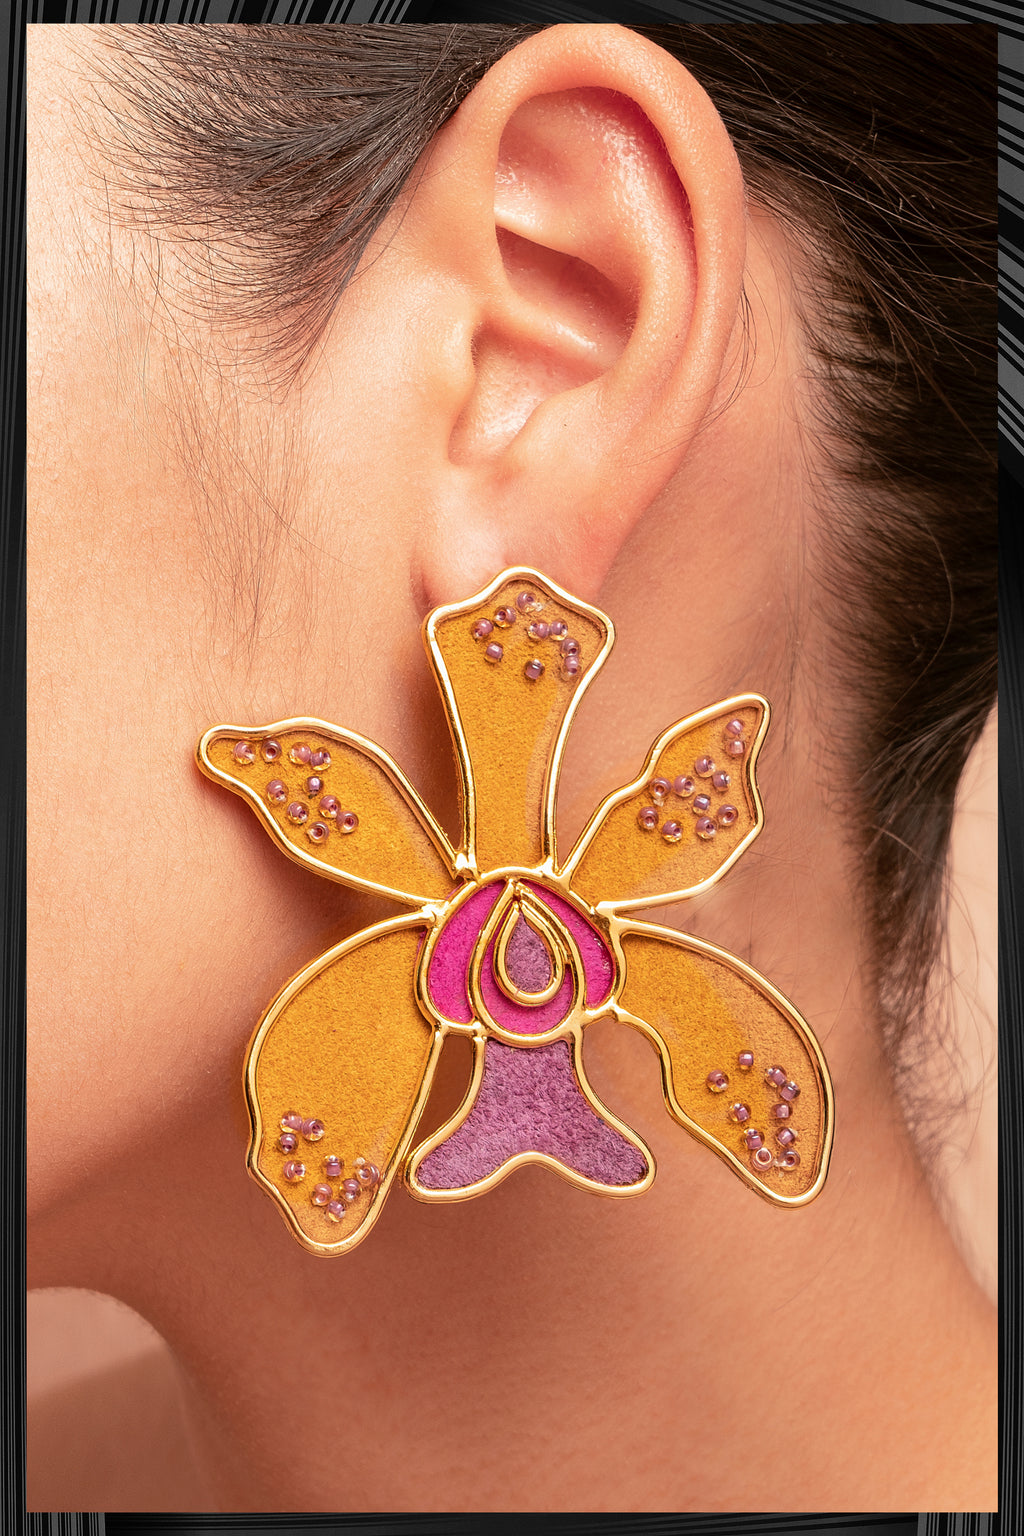 Golden Ocidium Orchid Earrings | Free Delivery - 3 Week Shipping